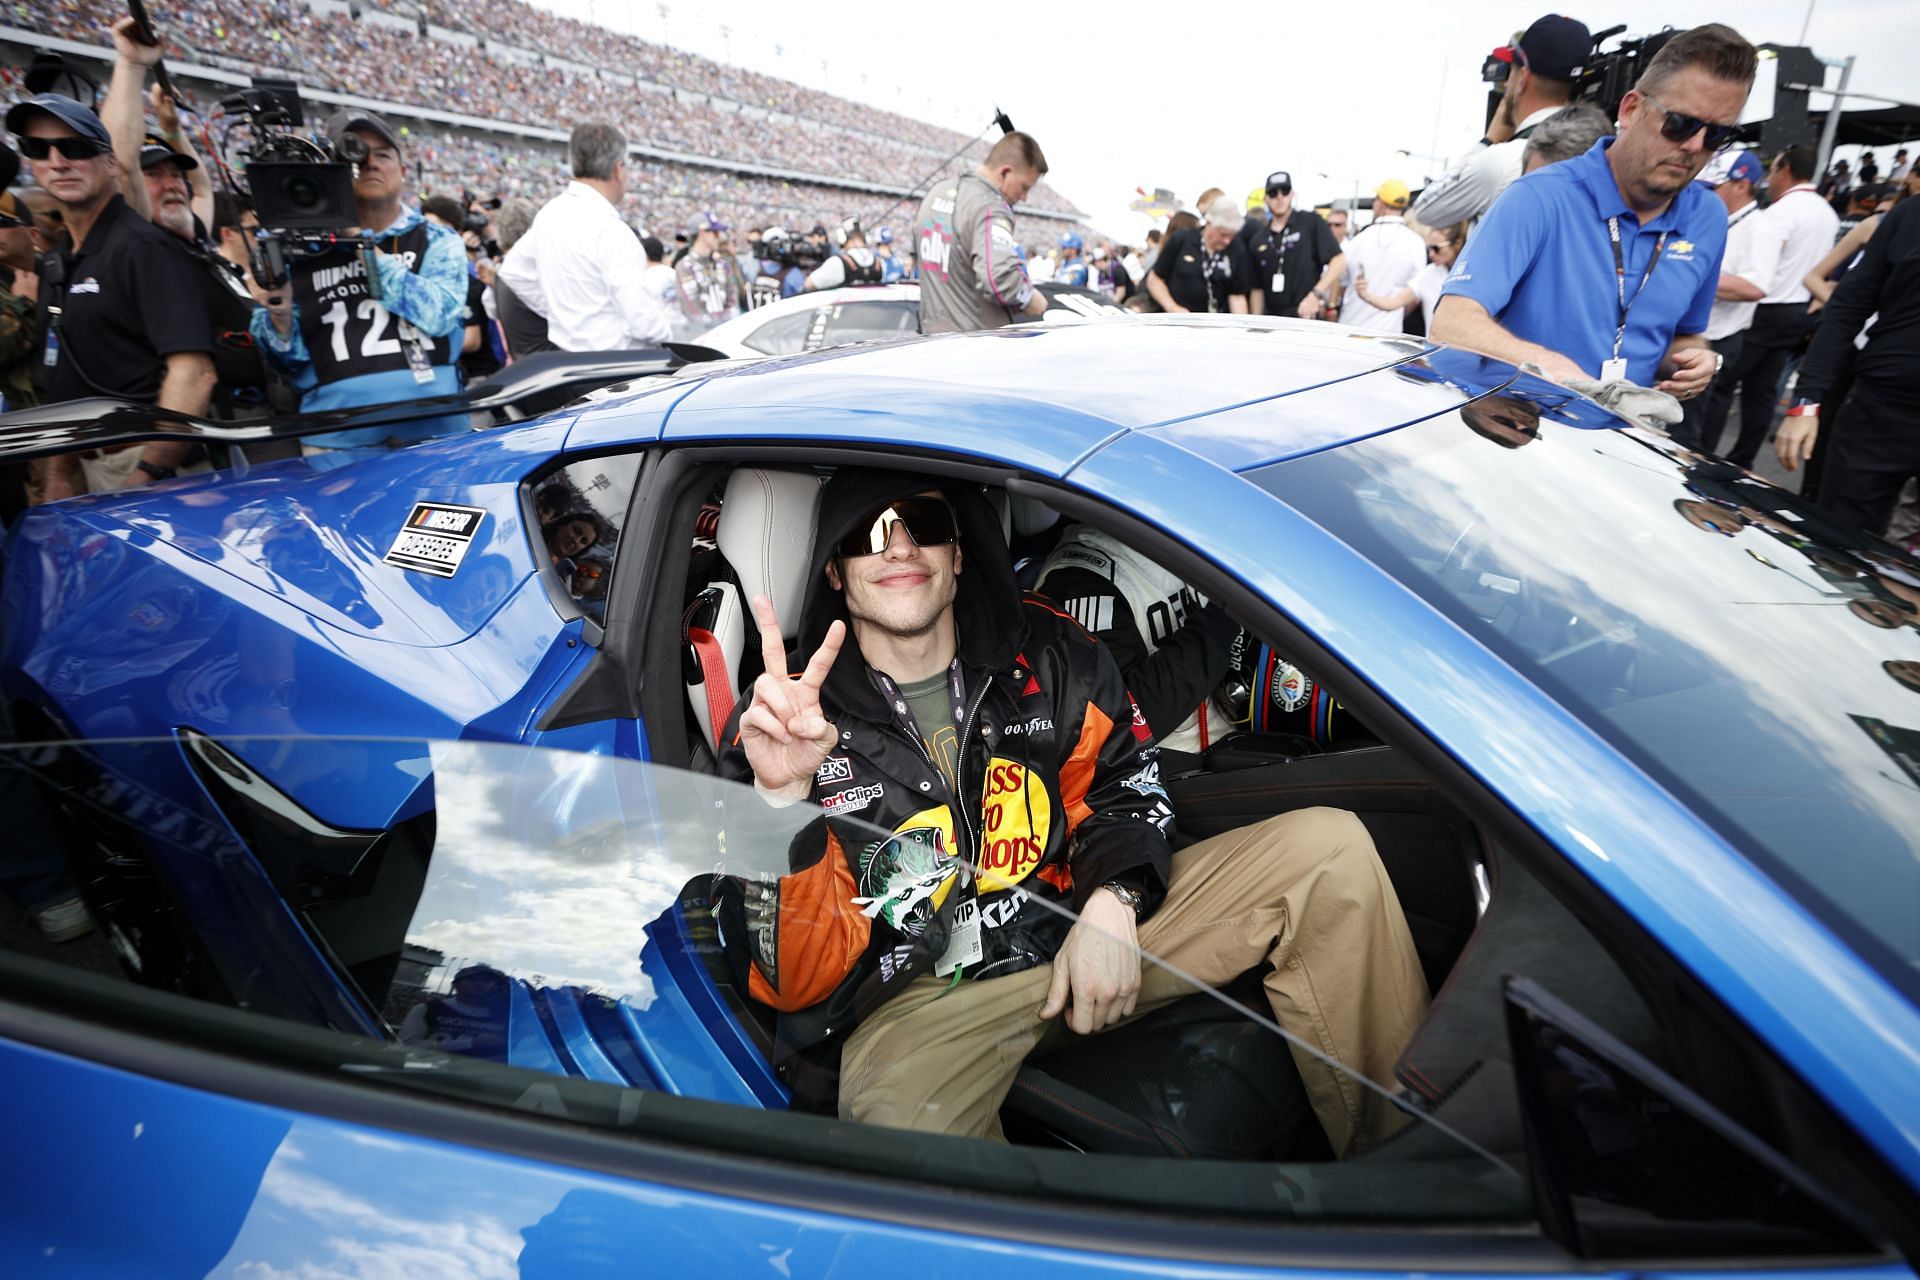 Pete Davidson at NASCAR Cup Series 65th Annual Daytona 500 (image via Getty Images)